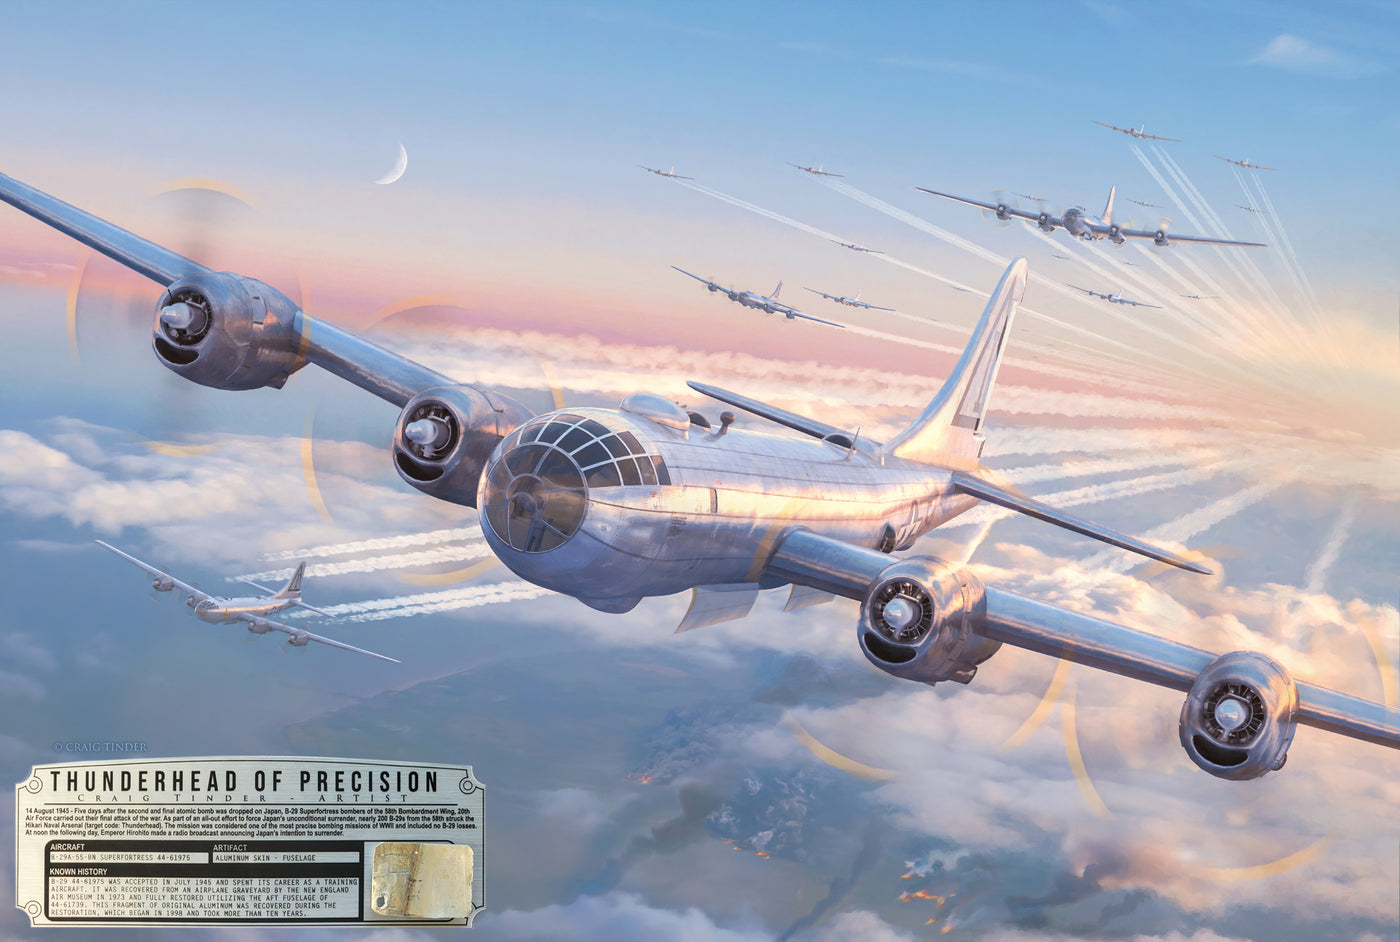 Thunderhead of Precision - B-29 Superfortress Aviation Art-Art Print-Aces In Action: The Workshop of Artist Craig Tinder